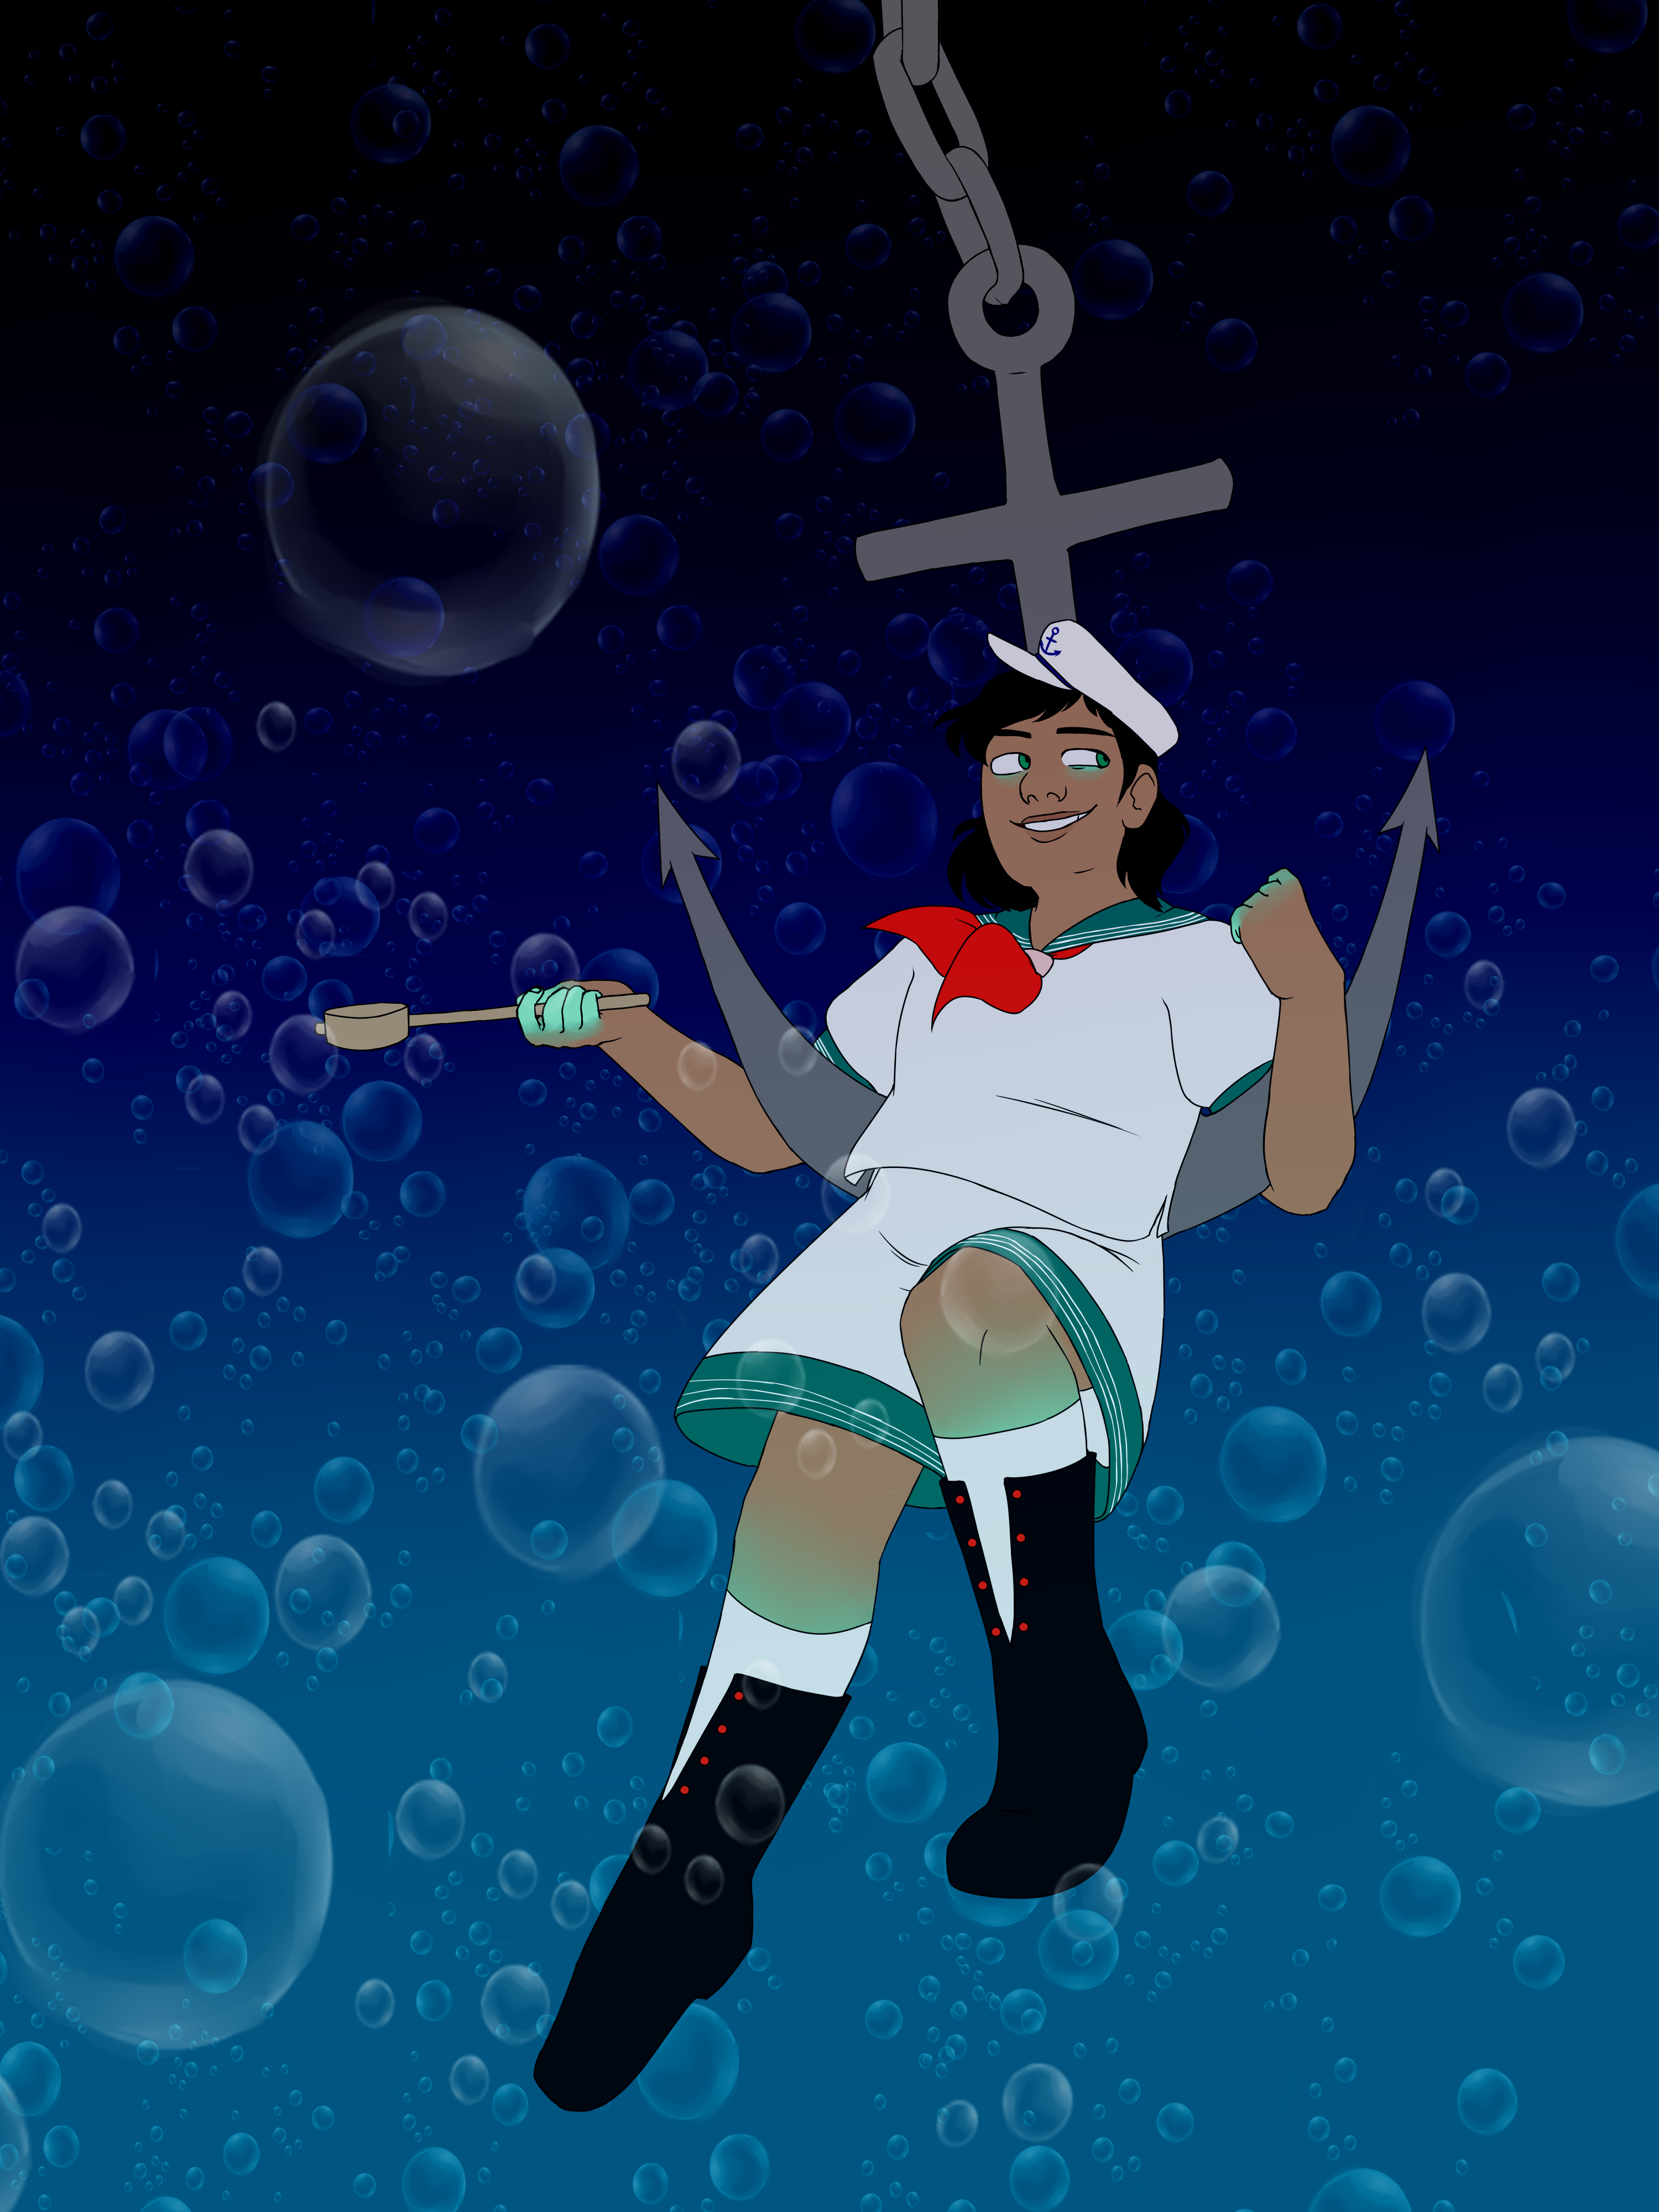 a drawing of Captain Murasa from Touhou. They are surrounded in bubbles